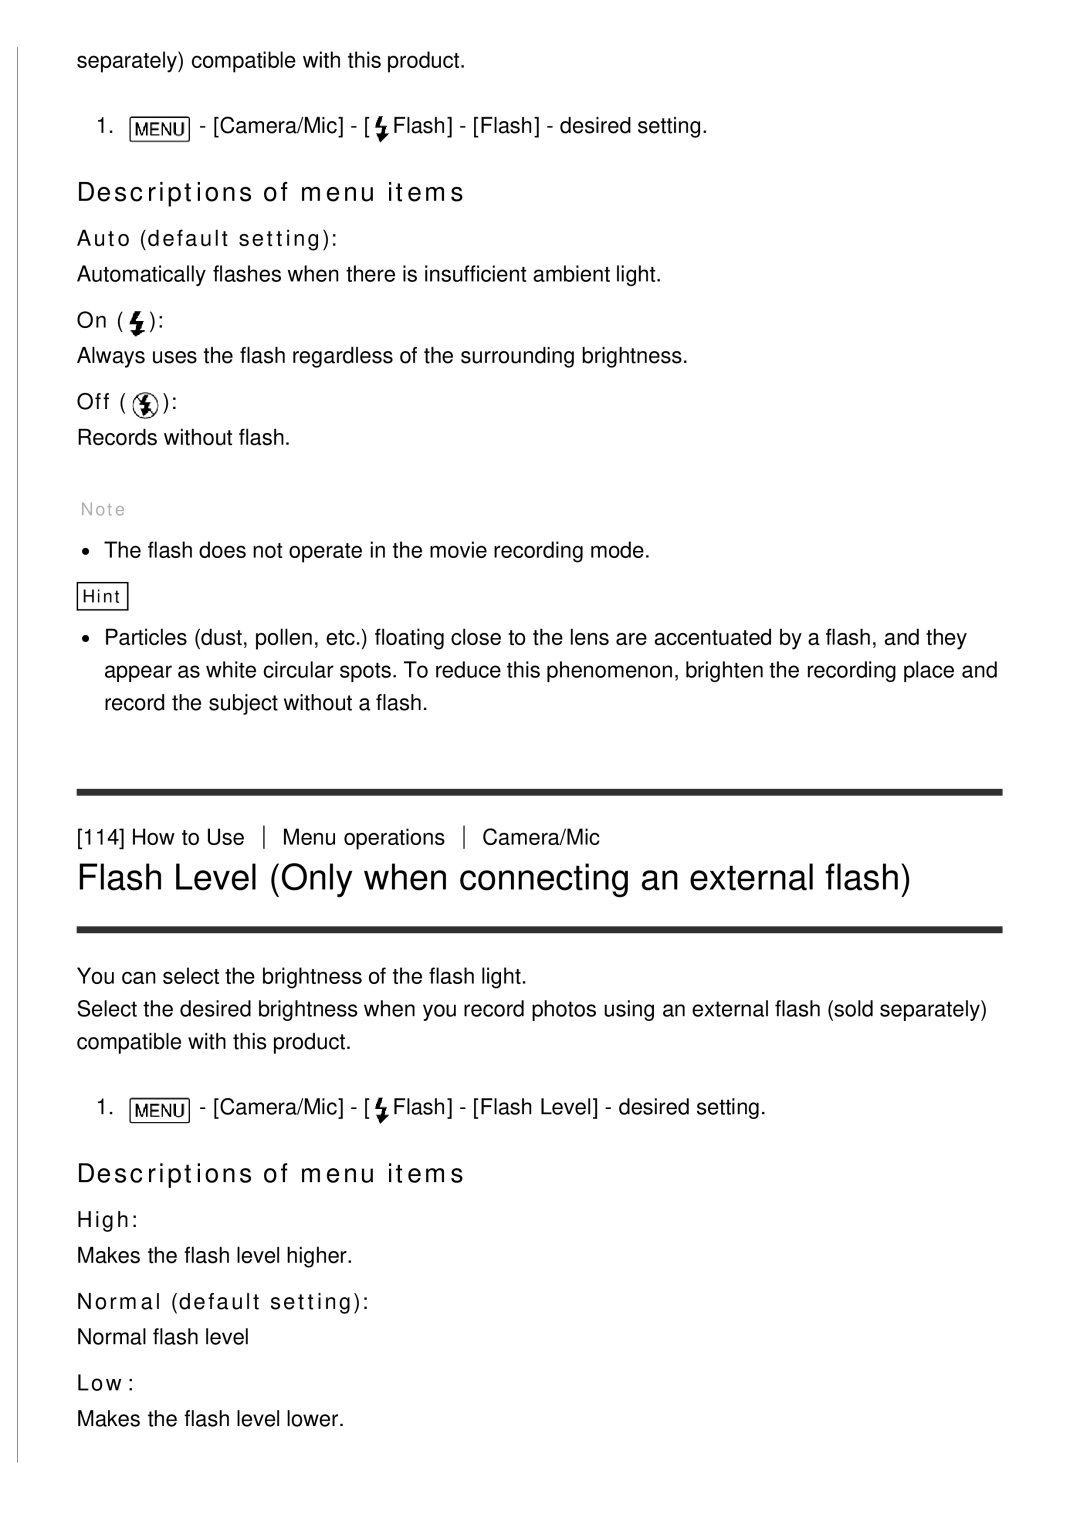 Sony FDR-AX100 Flash Level Only when connecting an external flash, High, Normal default setting, Auto default setting 